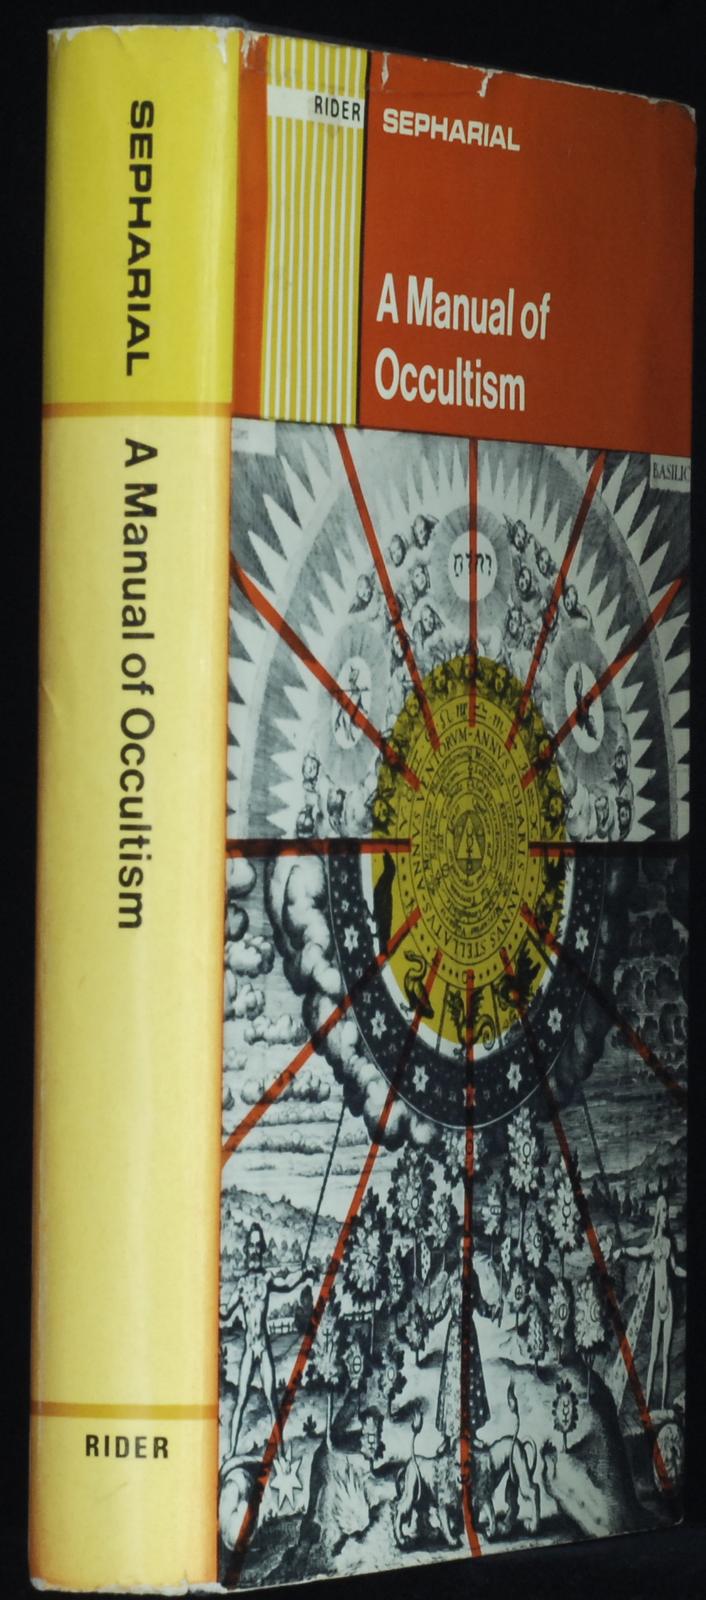 mbb007015c_-_Sepharial_-_A_Manual_Of_Occultism_-_Contains_Illustrations.jpg